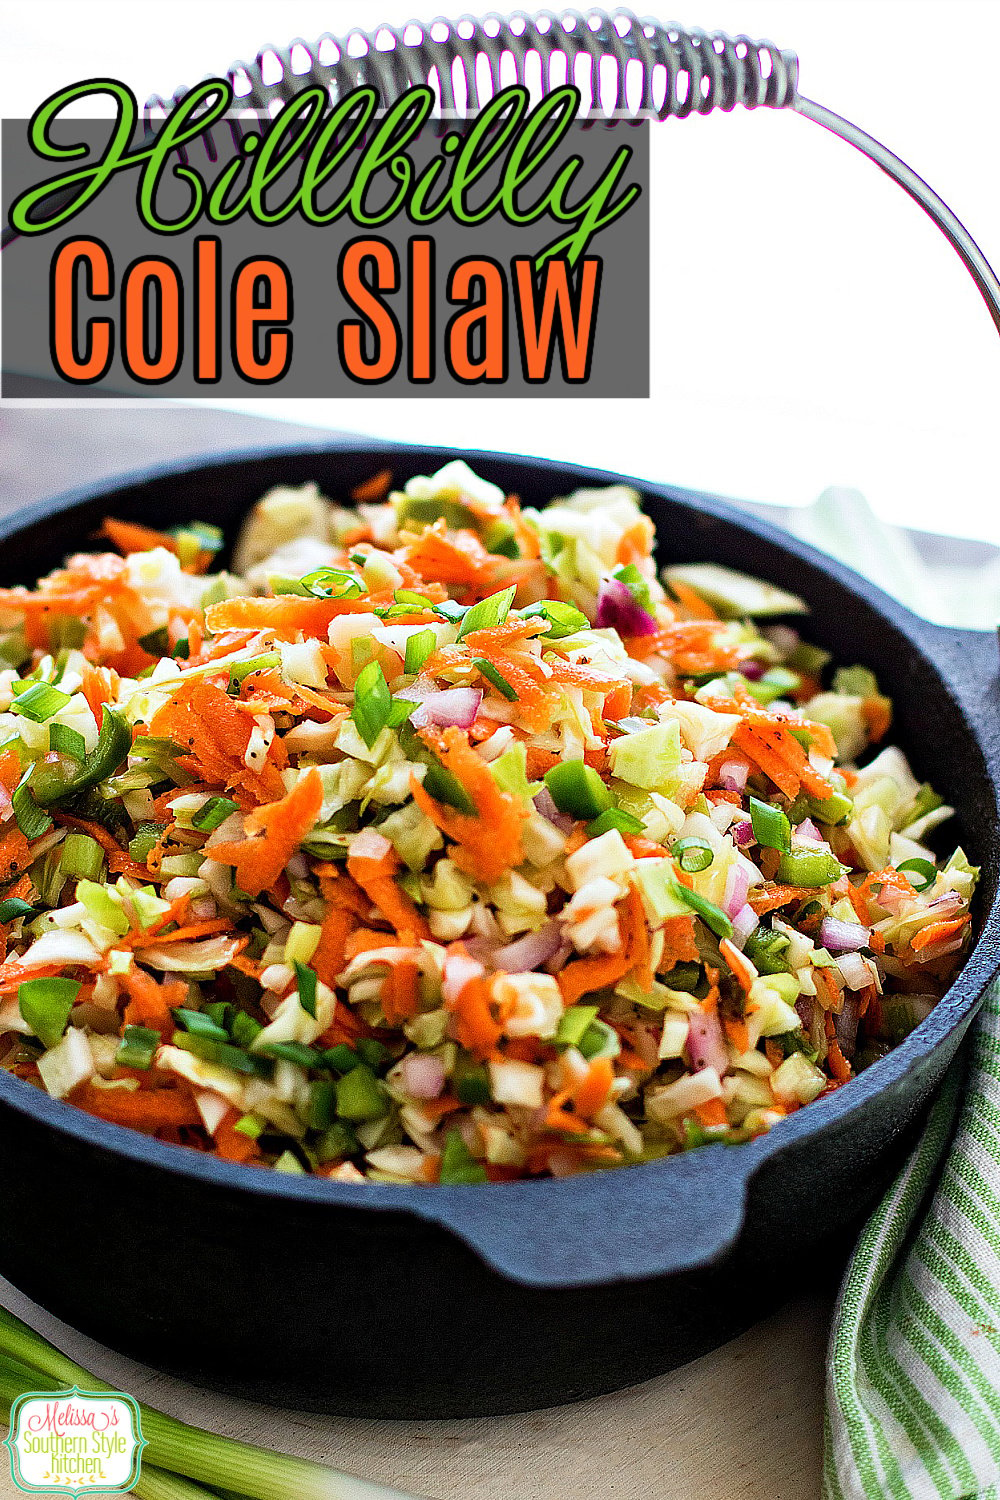 The sweet and tangy vinegar based dressing sets this cole slaw recipe apart from it's mayo-dressed counterparts. The fun name is inspired by a log cabin restaurant by the same name #coleslaw #vinegardressing #coleslawrecipes #deliciousrecipes #salads #summersides #sidedishrecipes #southernfood #southernrecipes #cabbagerecipes via @melissasssk